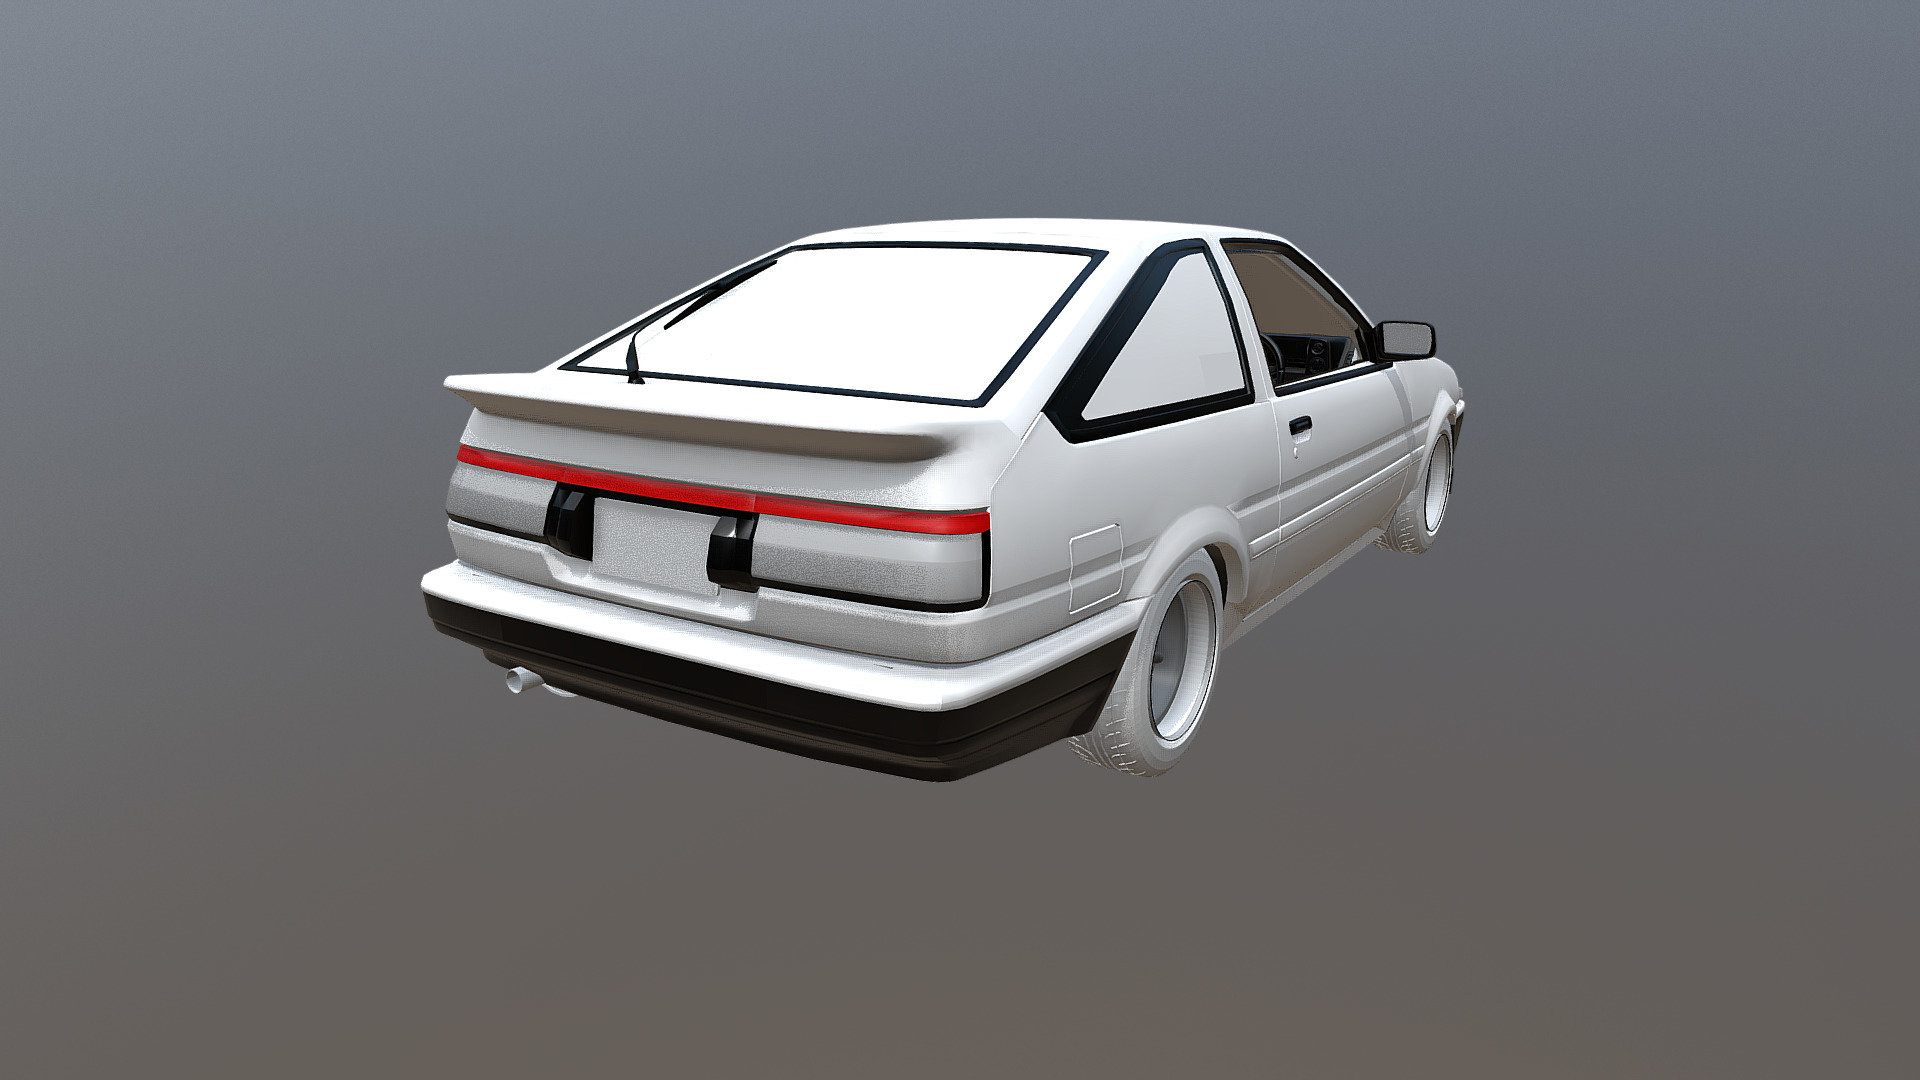 Still a heavy WIP. Based off the most loved japanese JDM car. feautures detailled interior, engine and underchassis model. A bit high poly and some parts do not fit 100&amp; correctly yet but all in all I think its one of the best ae86 sprinter trueno models out there&hellip;

:) - Toyota AE86 Sprinter Trueno V.1.0 - 3D model by Sneerik_dev 3d model